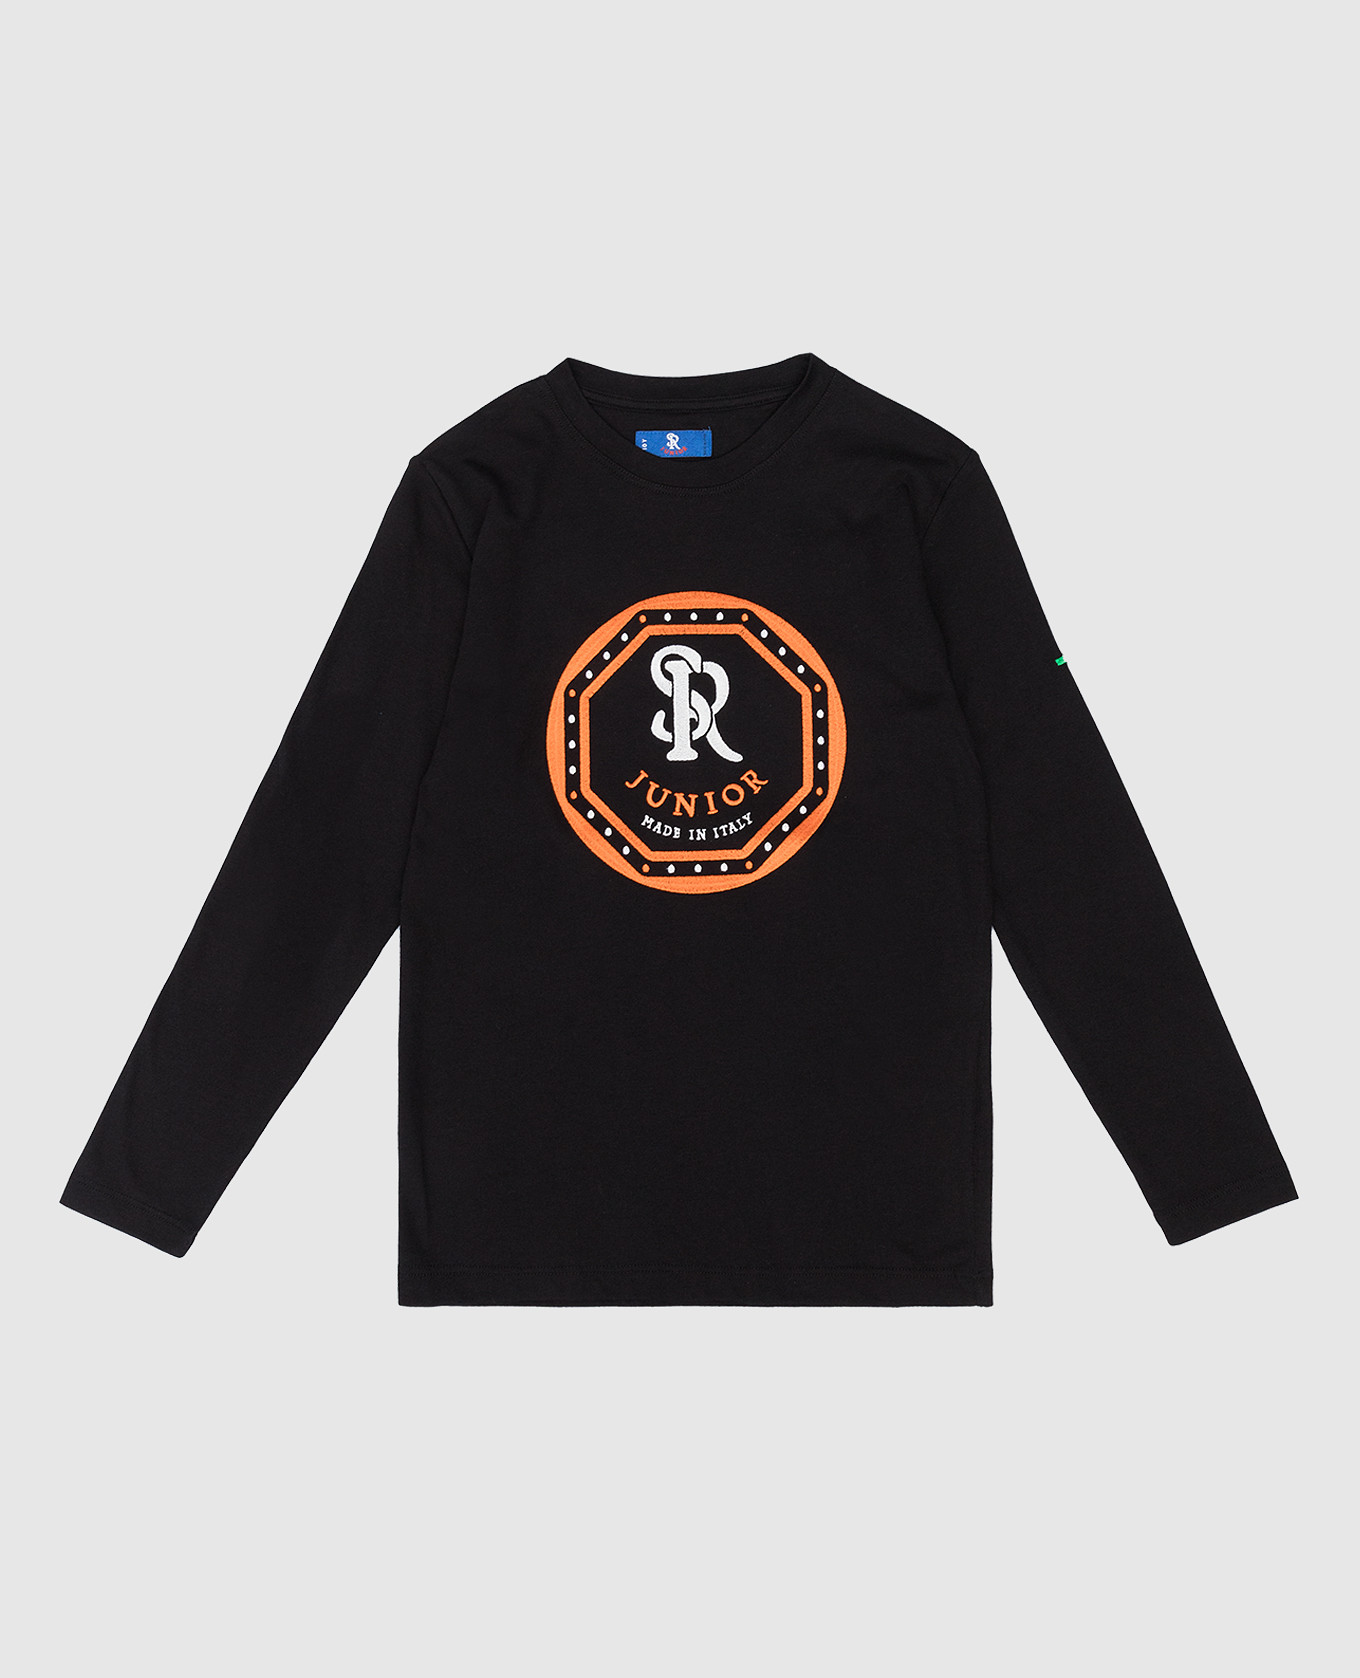 Children's black longsleeve with embroidery